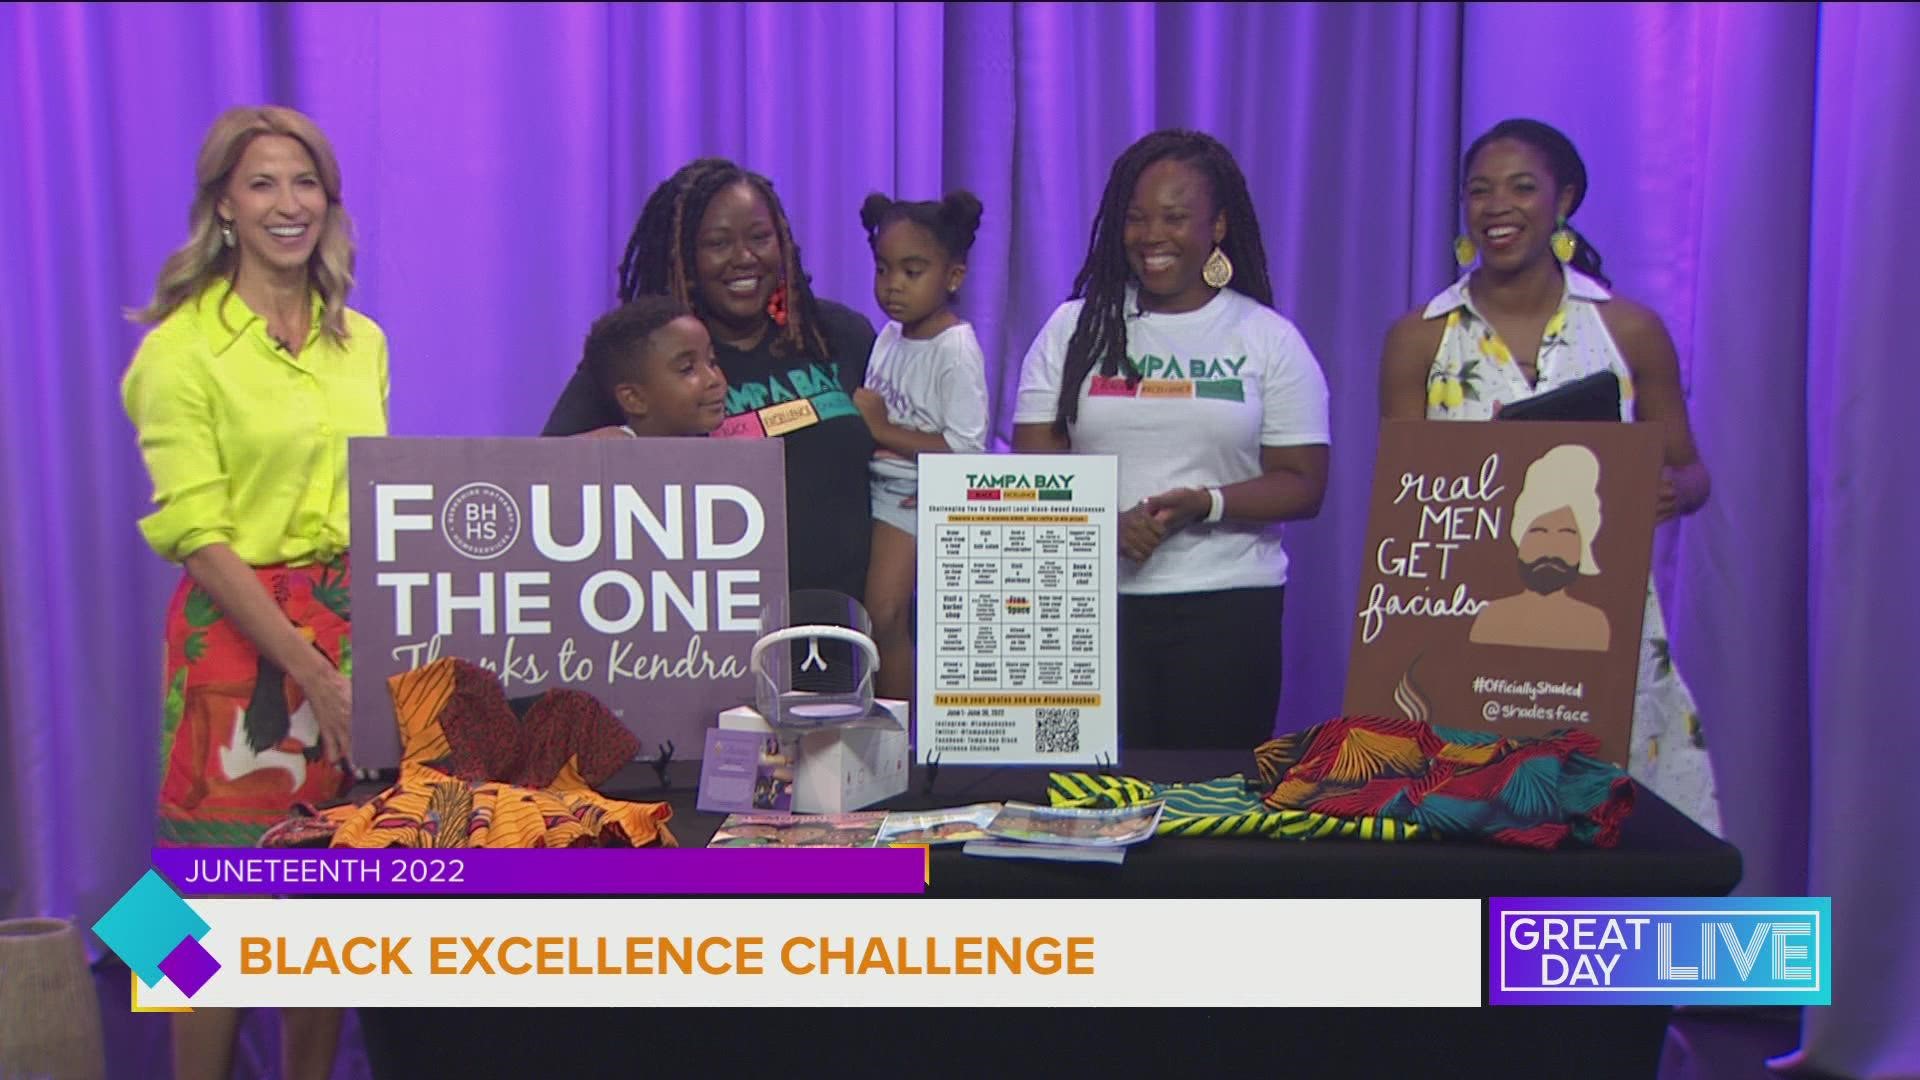 Local bloggers Karimah Henry and Kiva Williams share more about their Juneteenth Challenge and how it's supporting local black-owned businesses.